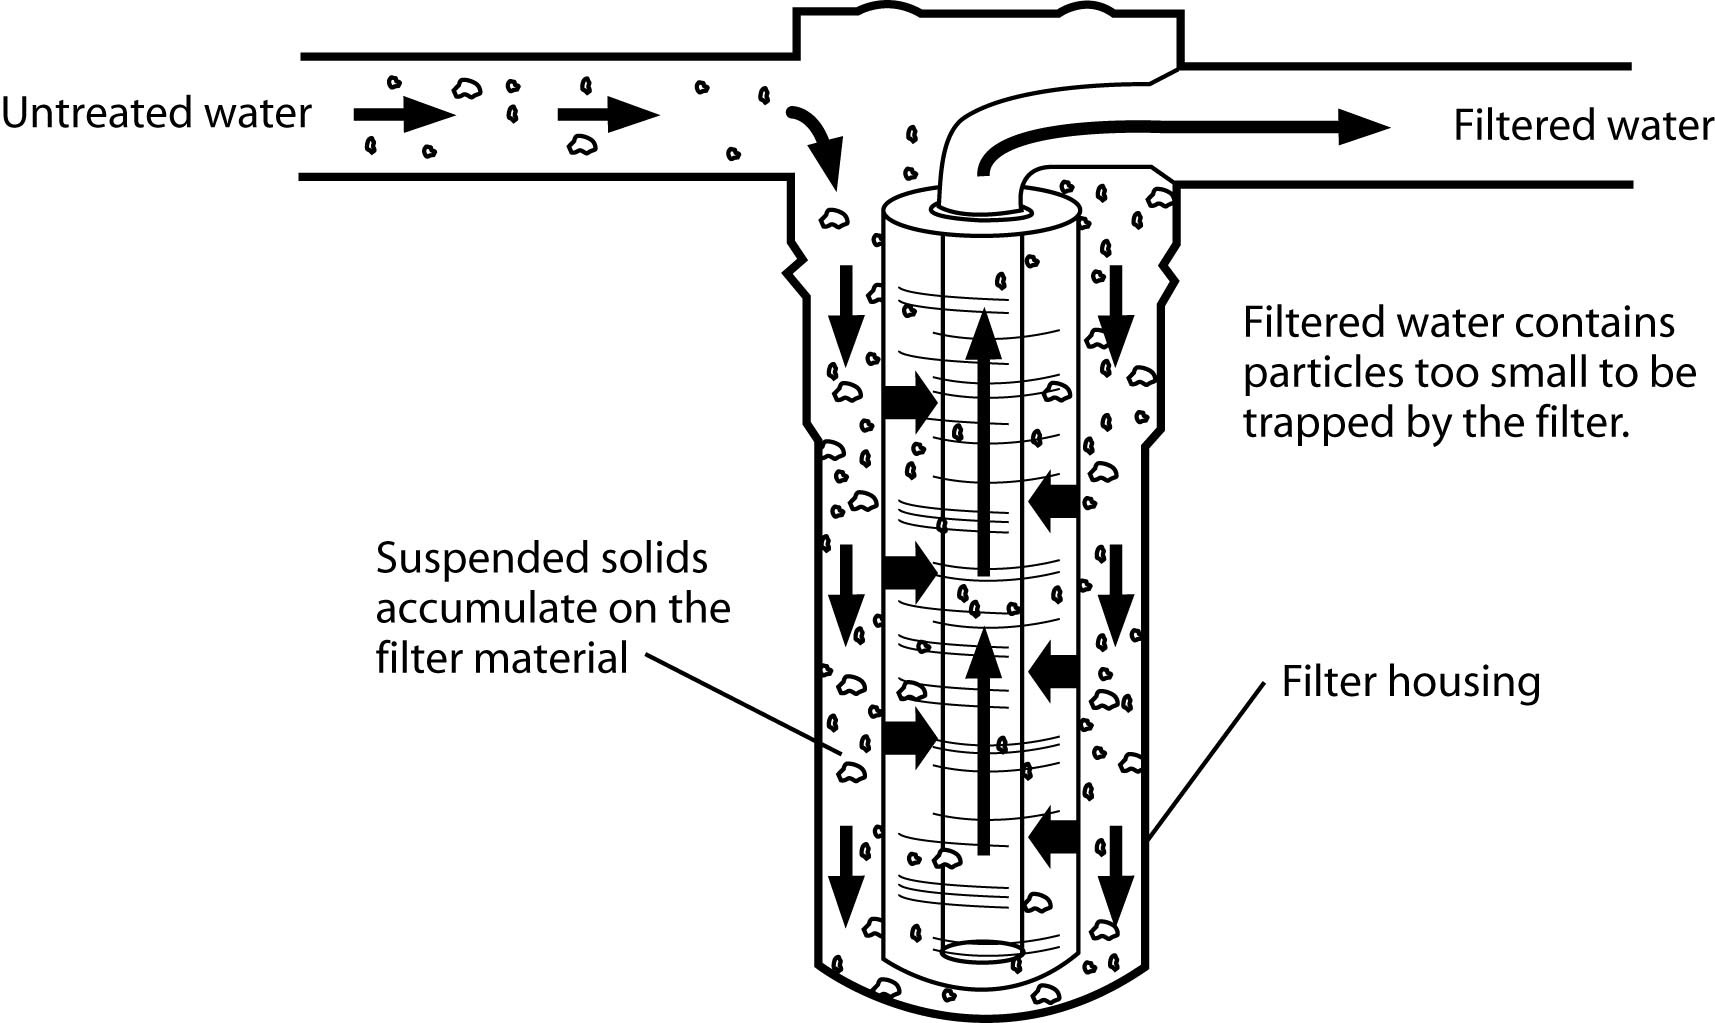 Diagram illustrating the sediment filtration process with cartridge filter